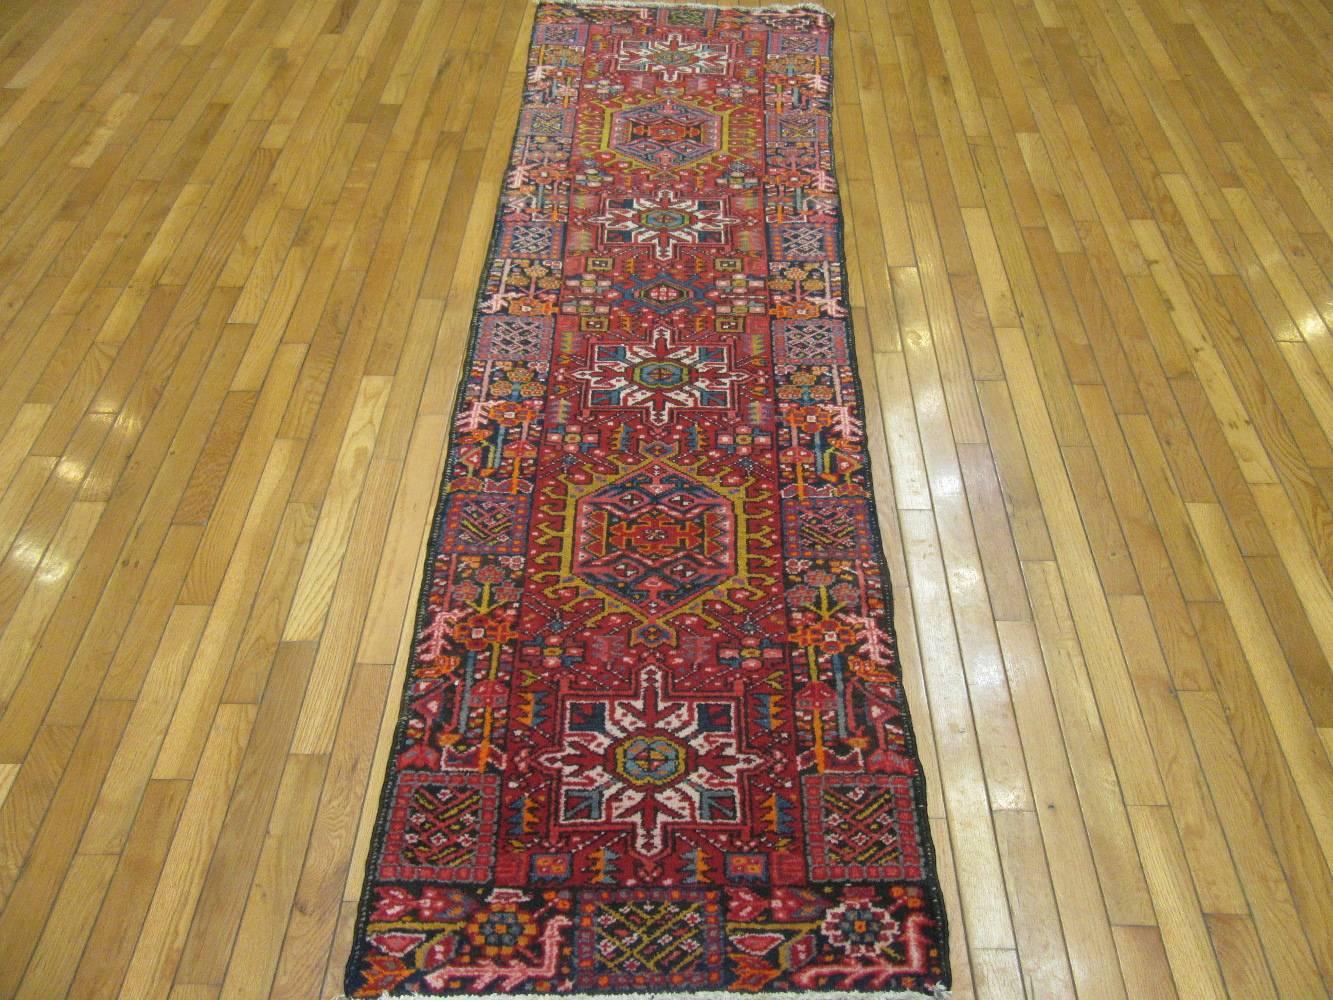 This is a short vintage hand-knotted wool Persian Karajeh runner rug. It has the trademark geometric multiple medallion design of the rugs from this village. It is in very good condition and measures 2' 5